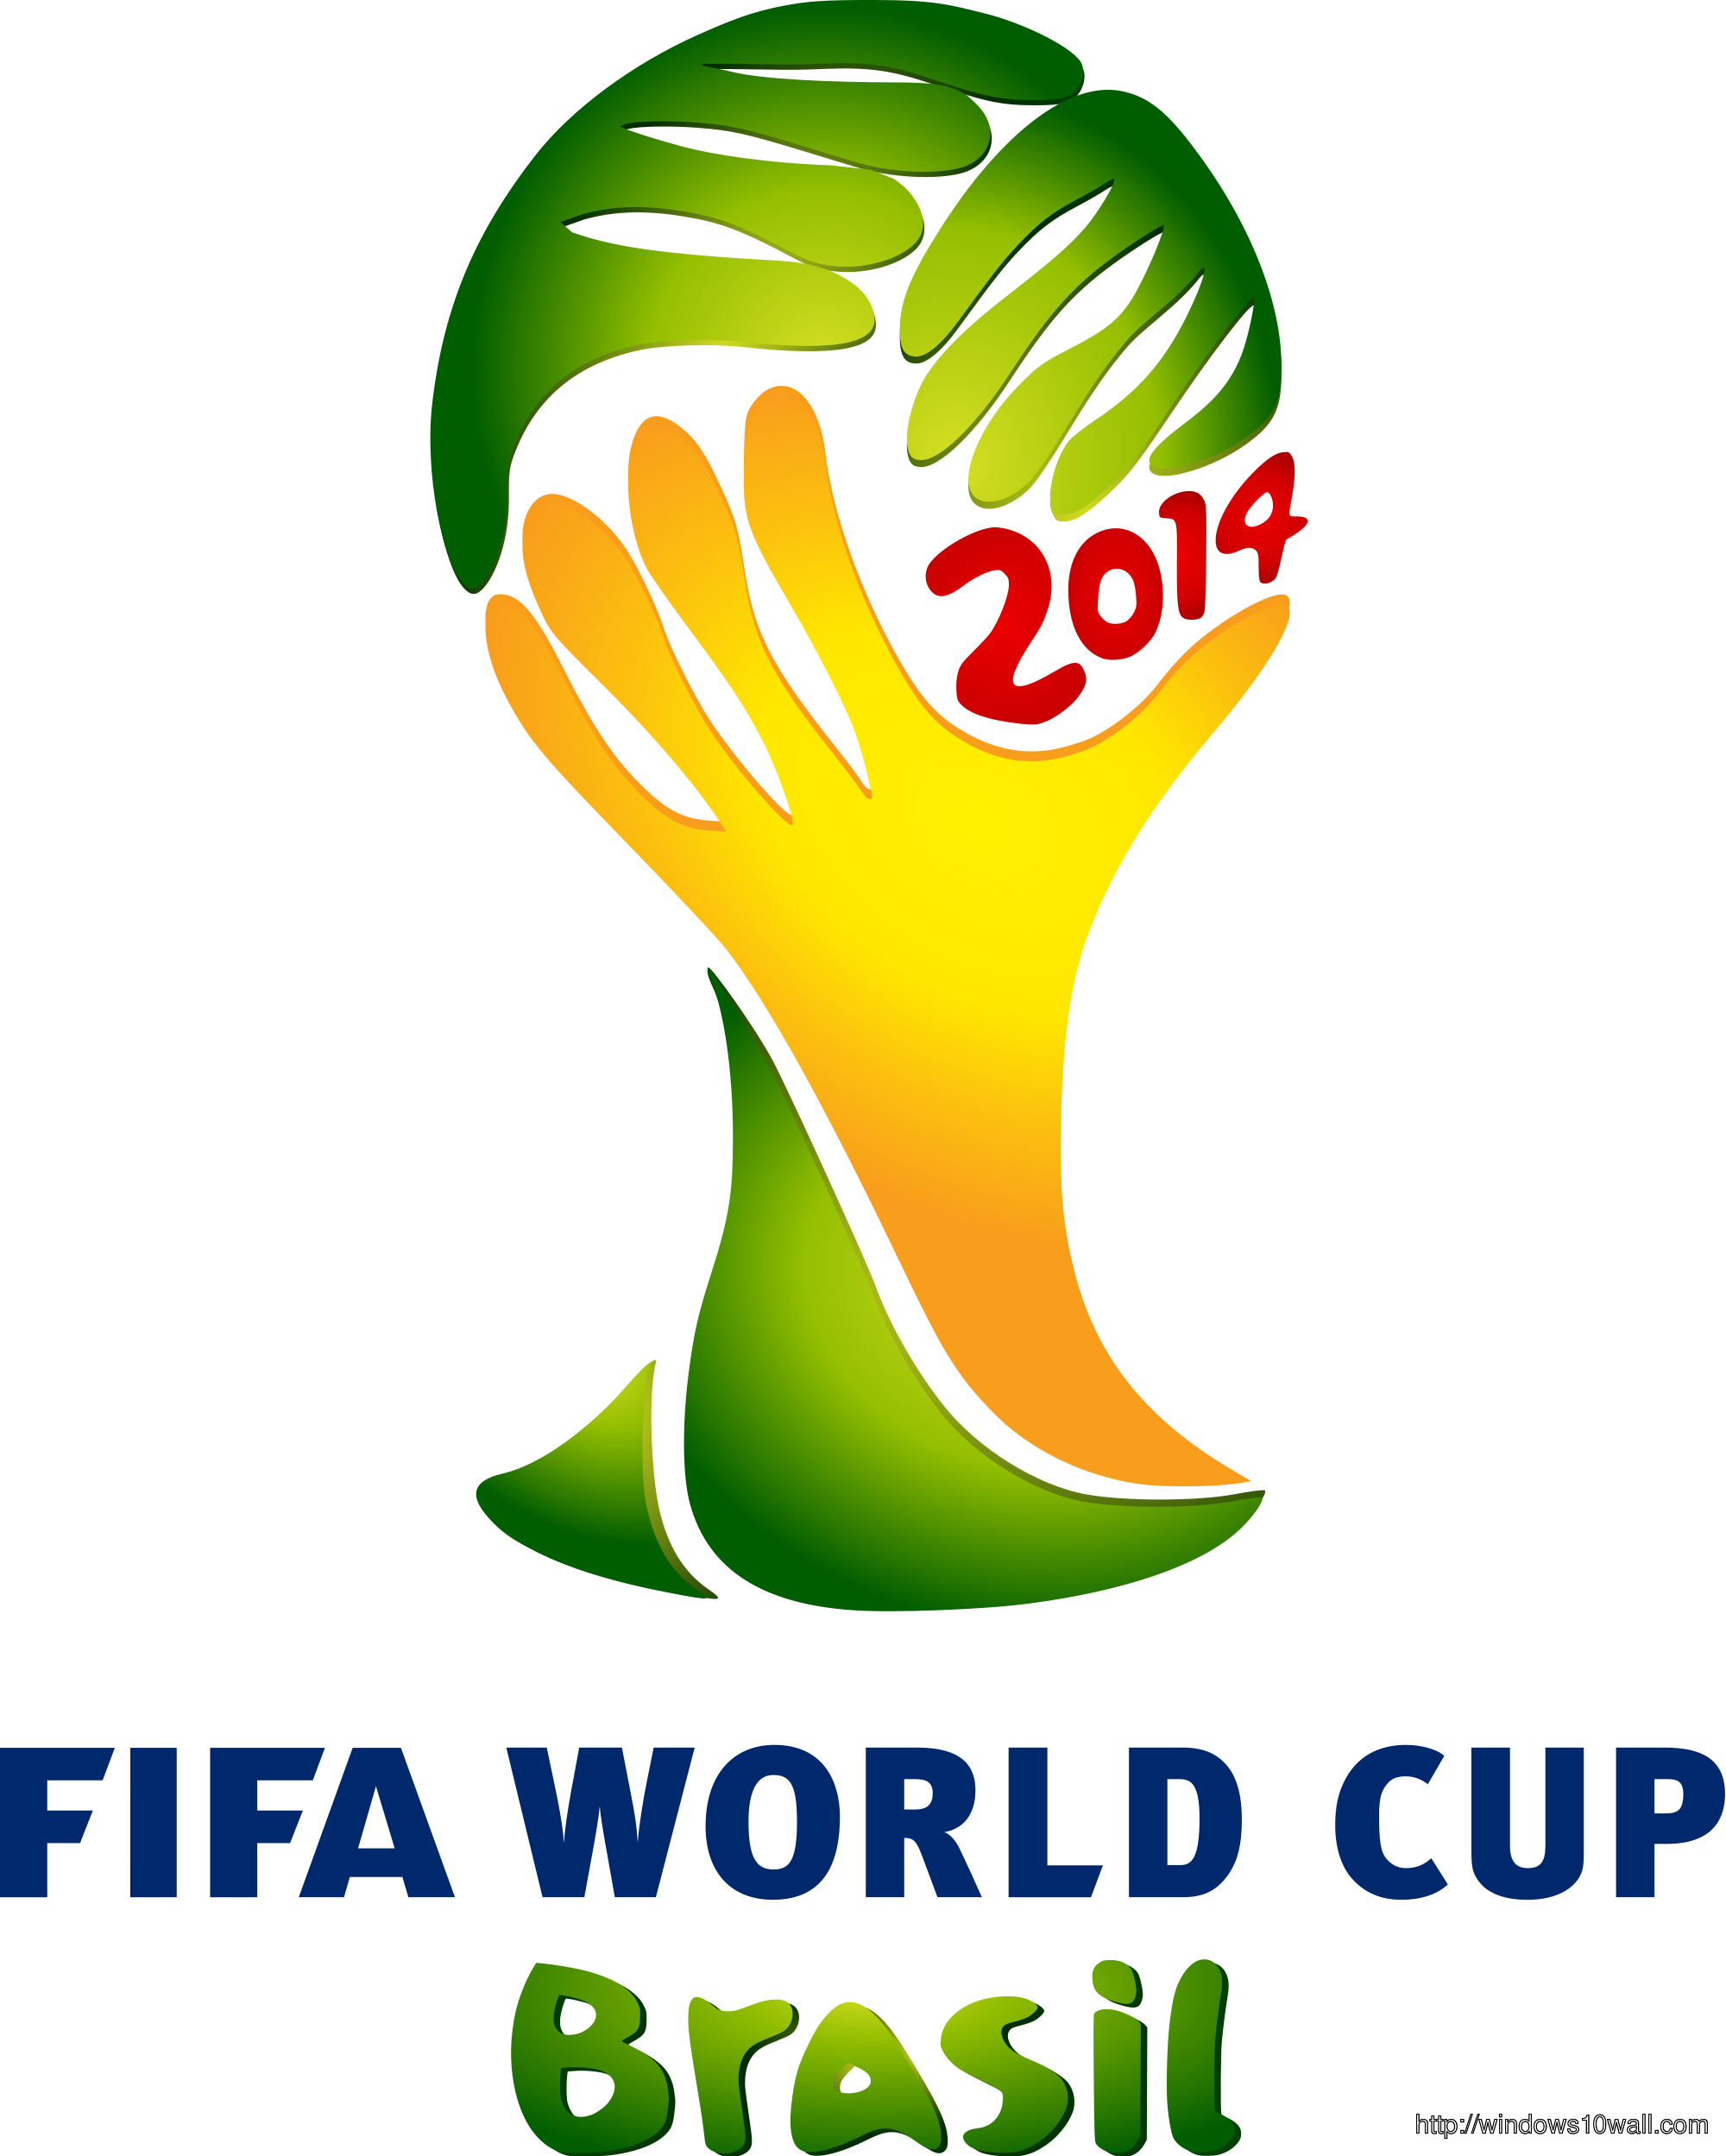 2014 World Cup logo Background Wallpaper